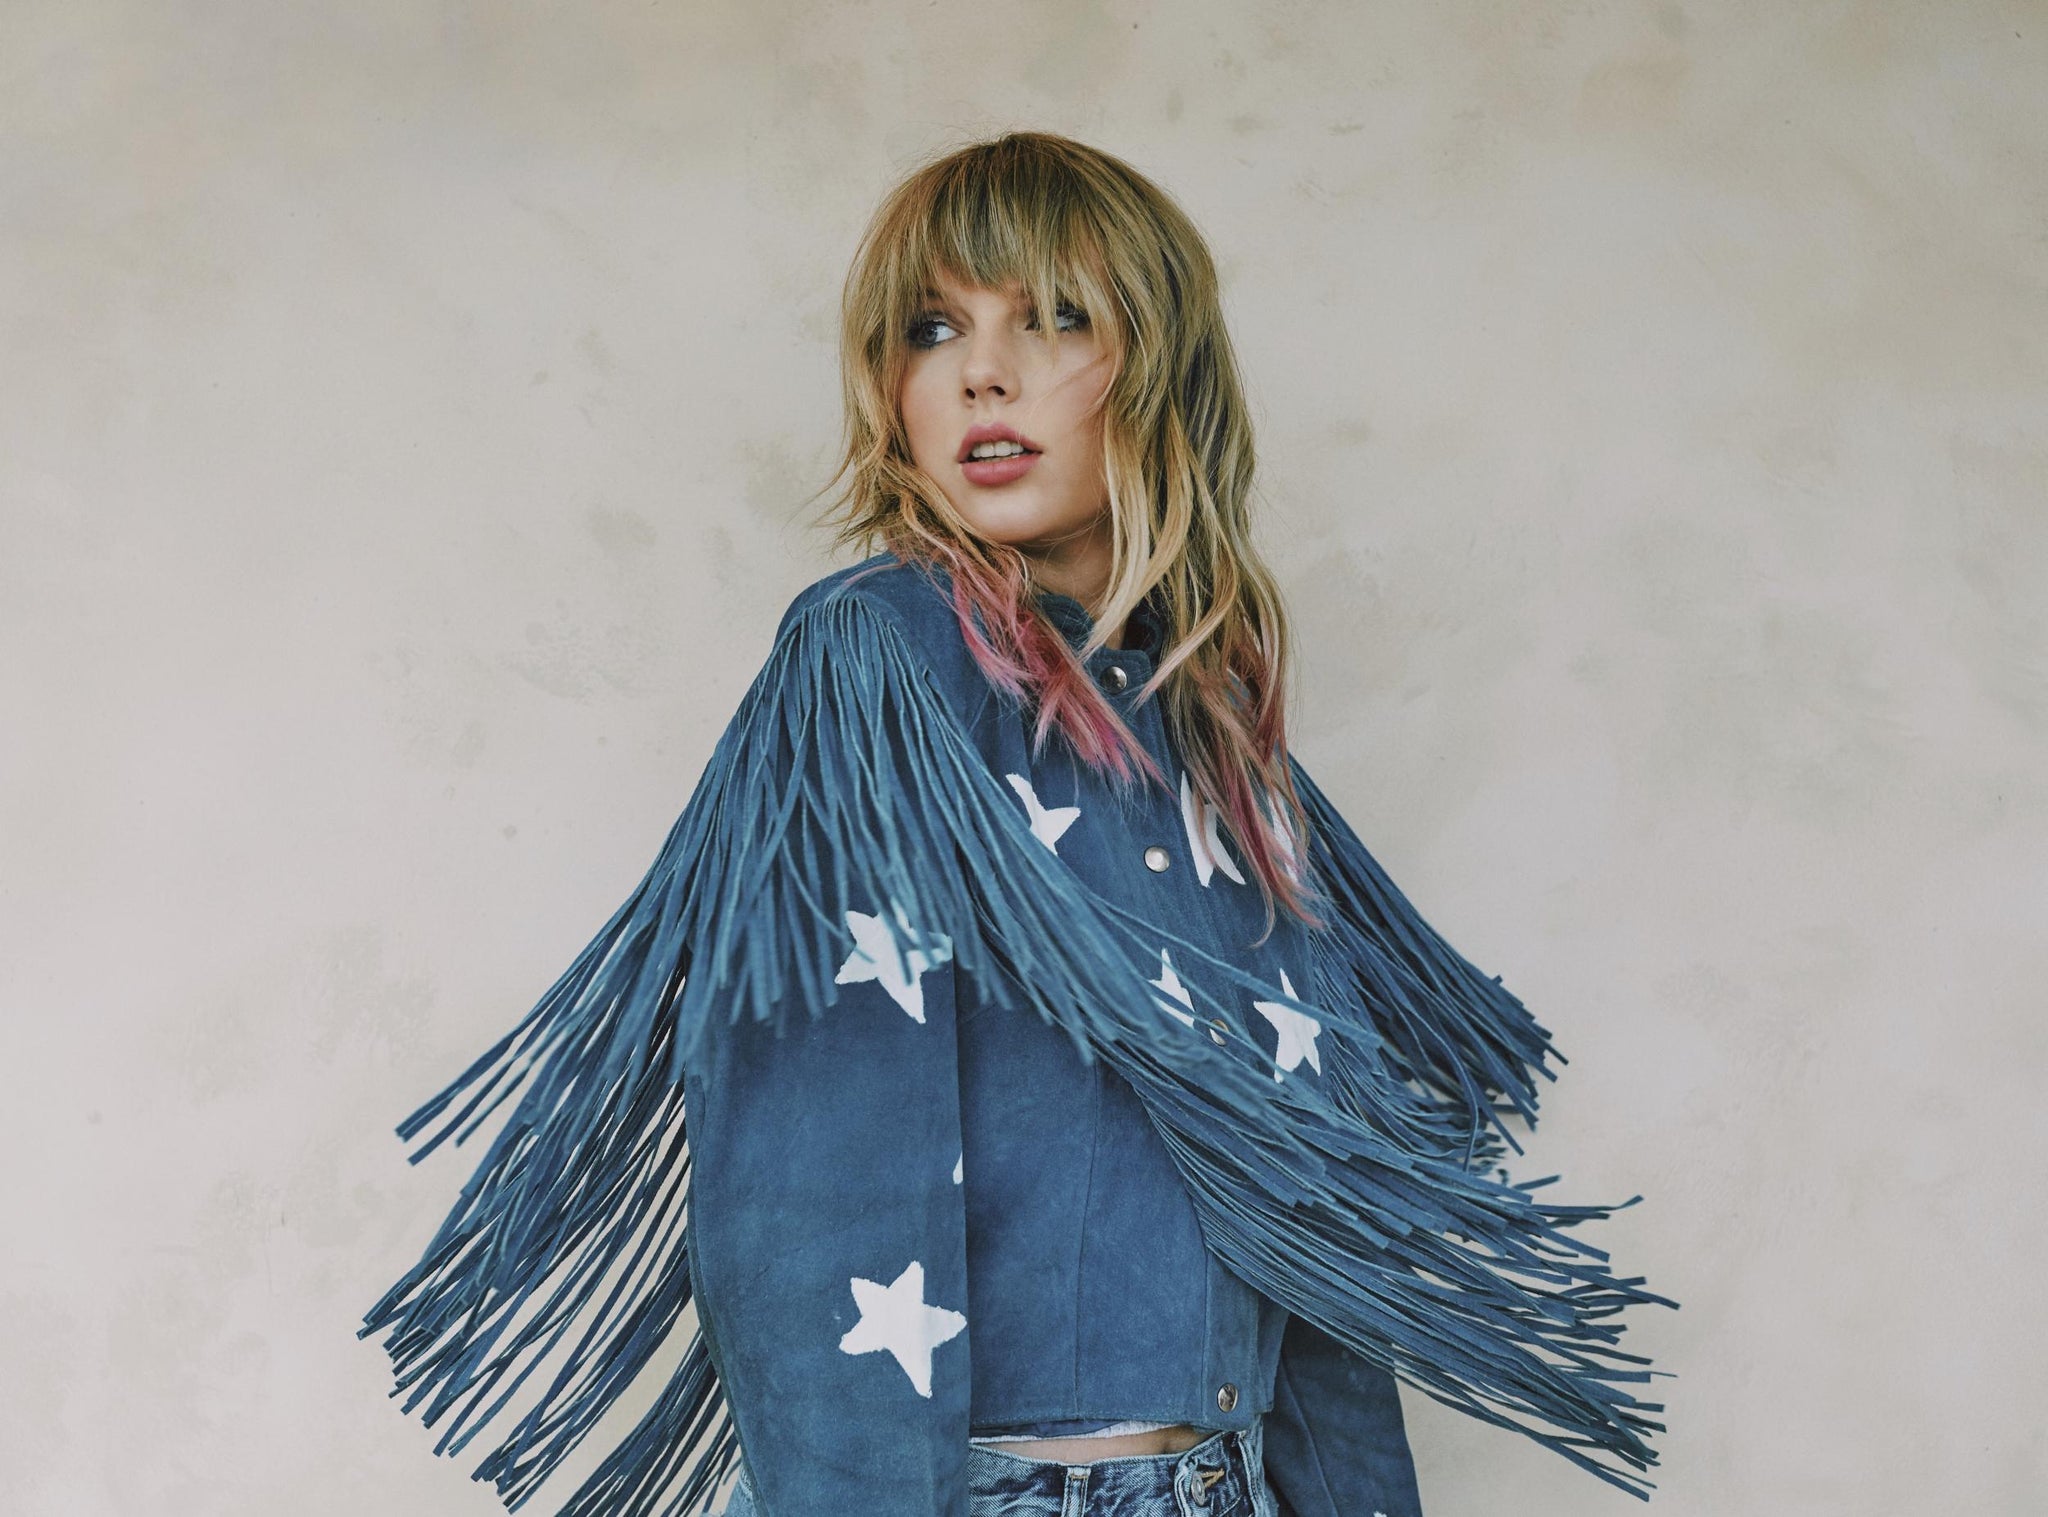 Taylor Swift: Her 100 best songs ranked